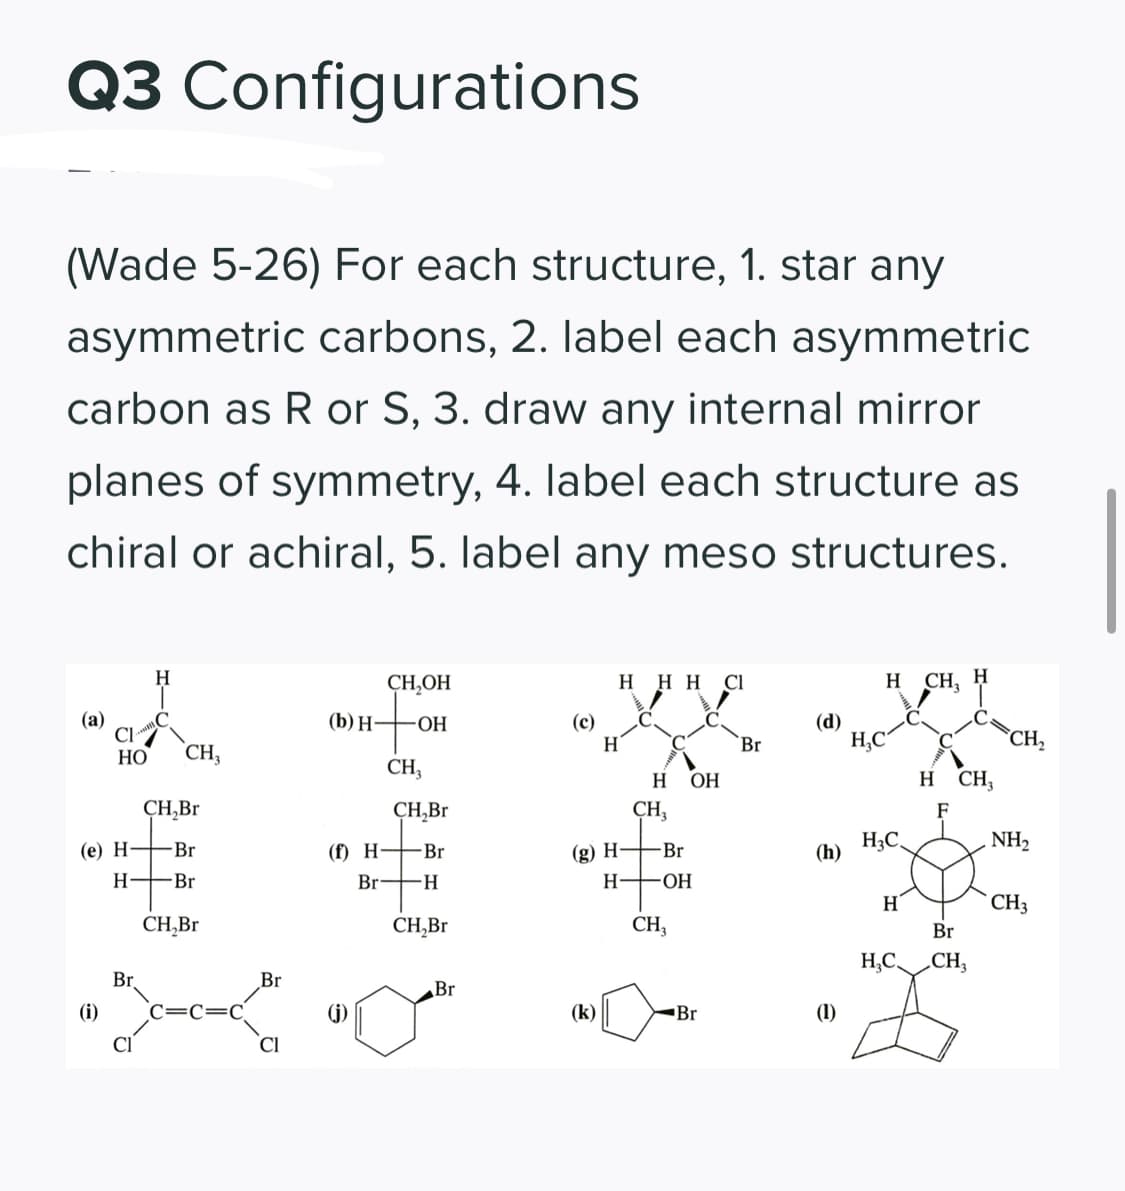 Q3 Configurations
(Wade 5-26) For each structure, 1. star any
asymmetric carbons, 2. label each asymmetric
carbon as R or S, 3. draw any internal mirror
planes of symmetry, 4. label each structure as
chiral or achiral, 5. label any meso structures.
H.
CH,OH
H H H CI
H CH,
H
(a)
Cl
(b) Н—он
(c)
H
(d)
H,C
CH,
Br
НО
CH,
CH,
H OH
CH,
H.
CH,Br
CH,Br
ÇH,
F
H3C.
NH2
(() Н— Br
Br +H
(e) H +Br
(g) H Br
(h)
H -Br
H-
OH
H.
` CH3
CH,Br
CH,Br
CH,
Br
H,C.
CH,
Br
Br
Br
(i)
(j)
(k)
Br
(1)
Cl
Cl
